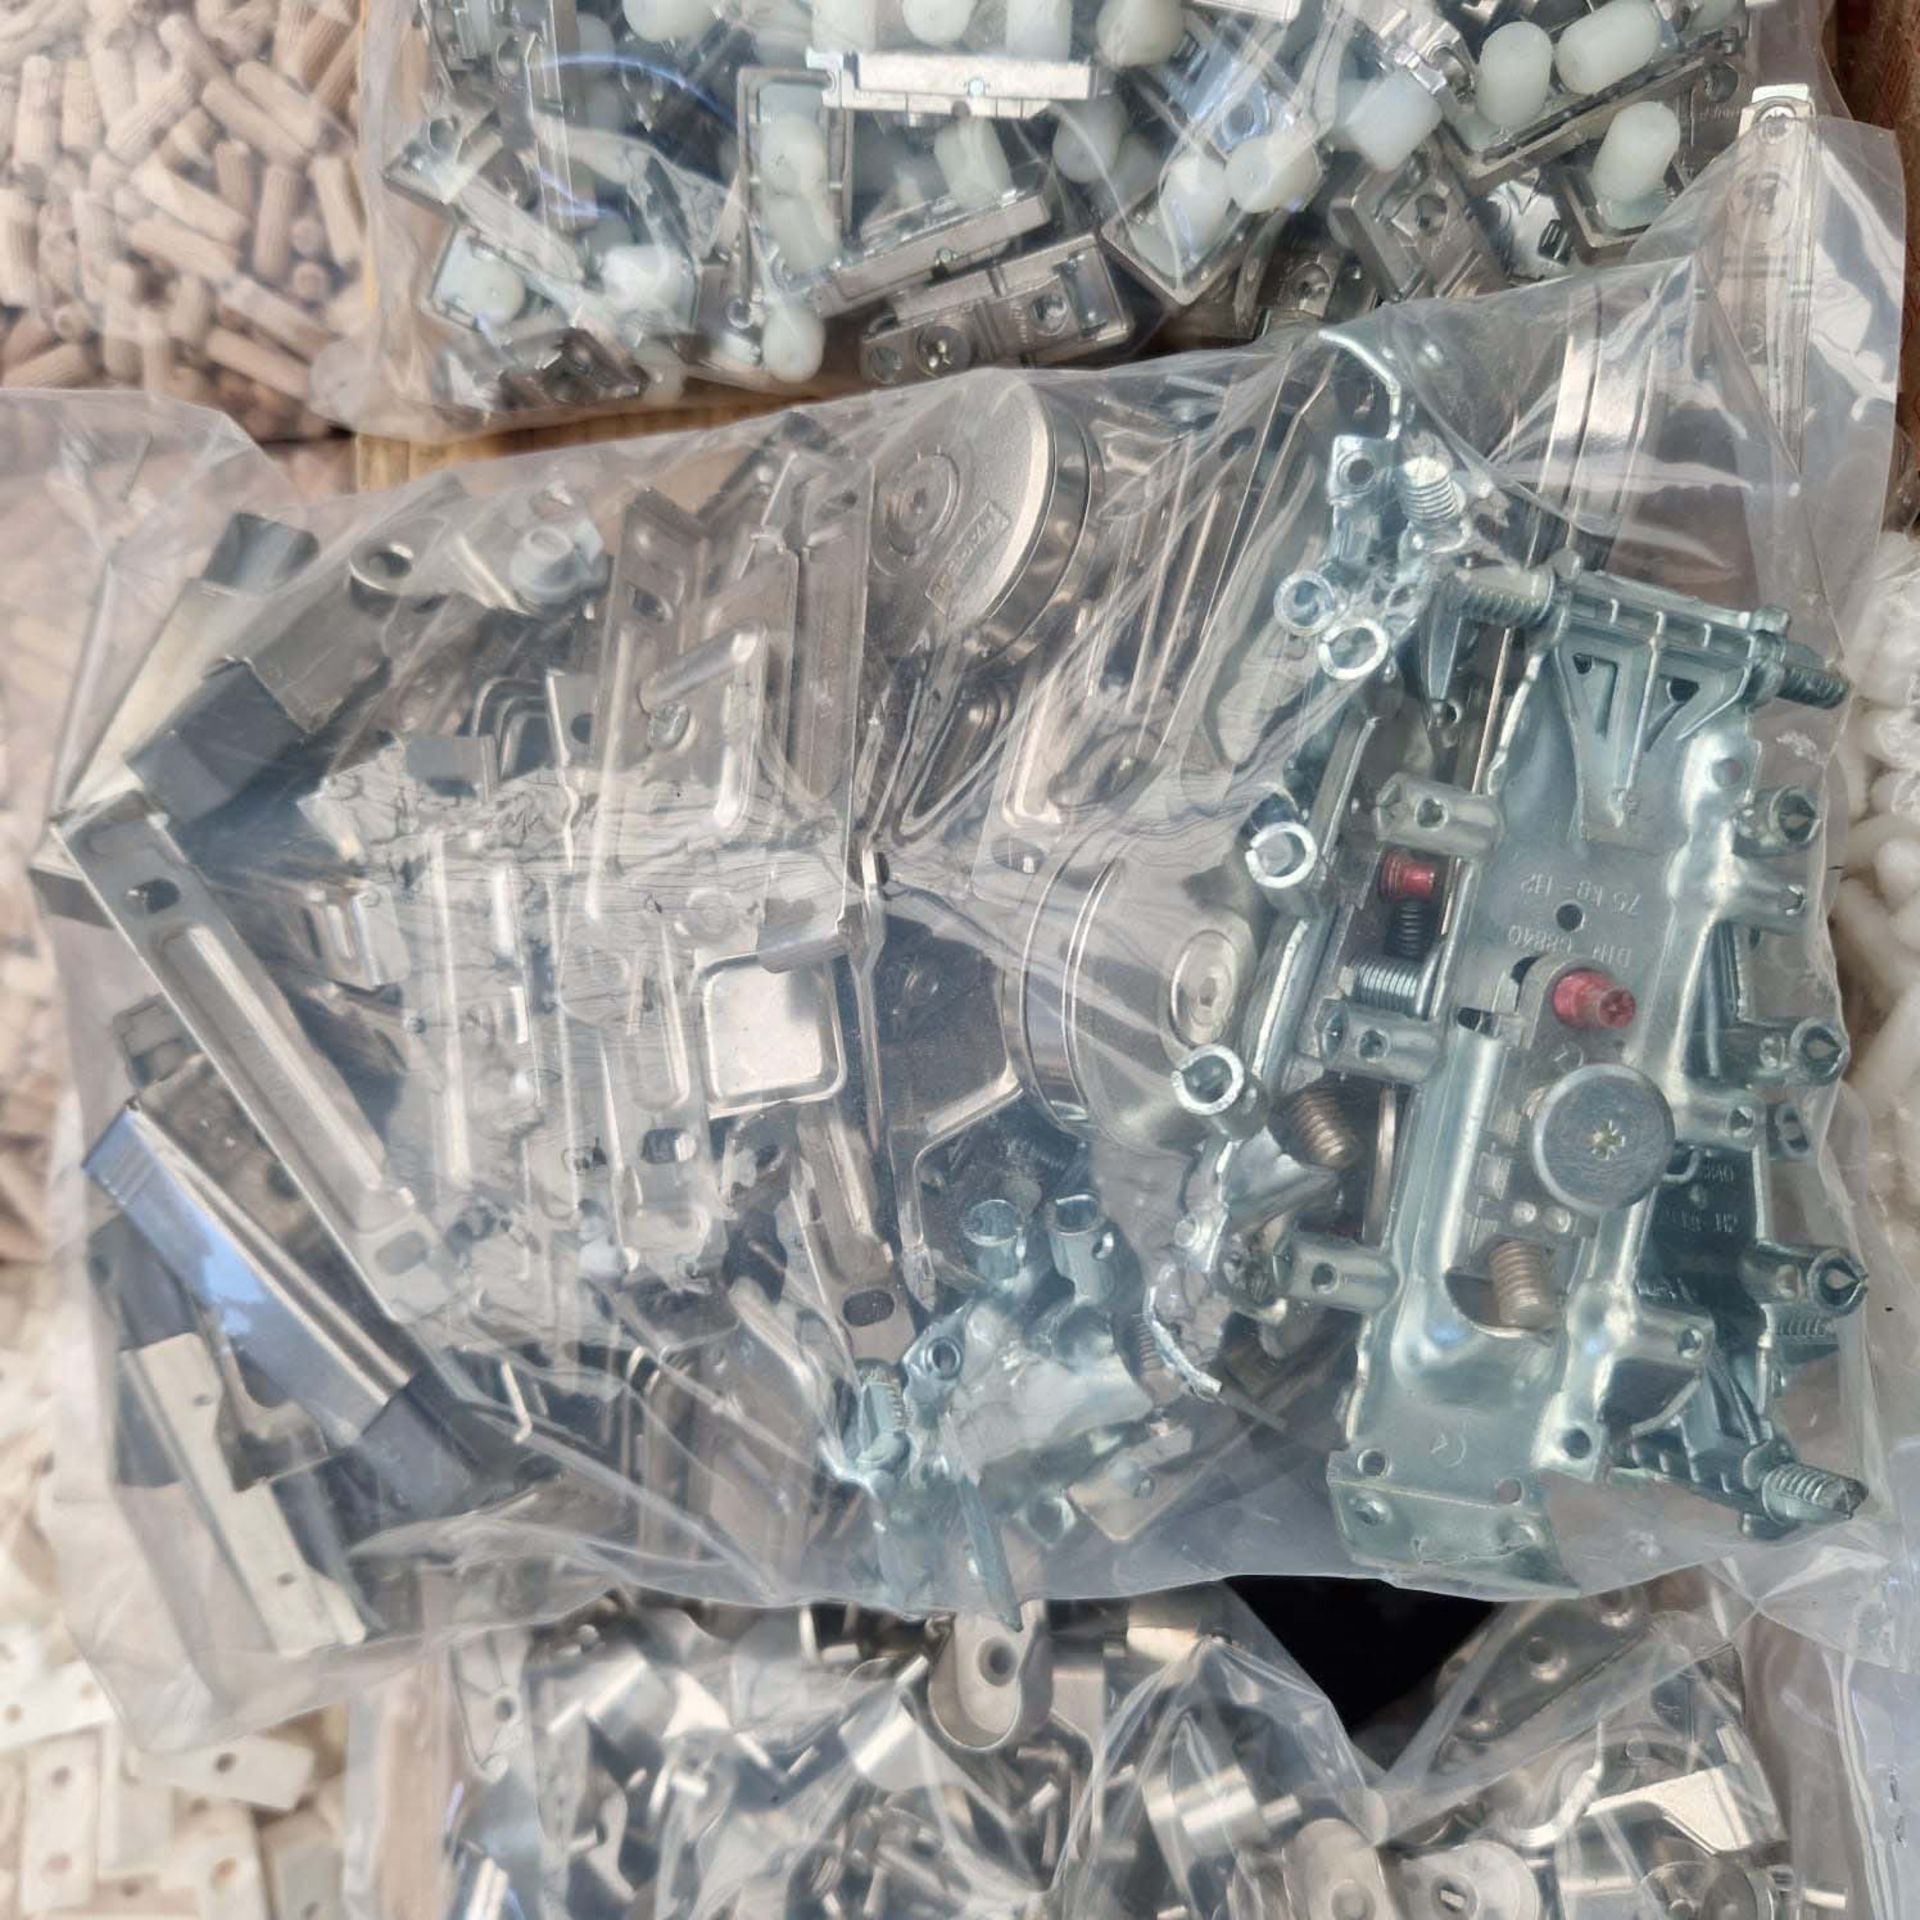 Quantity of Various Screws, Dowels & Hinges Etc. For Woodworking. - Image 22 of 24